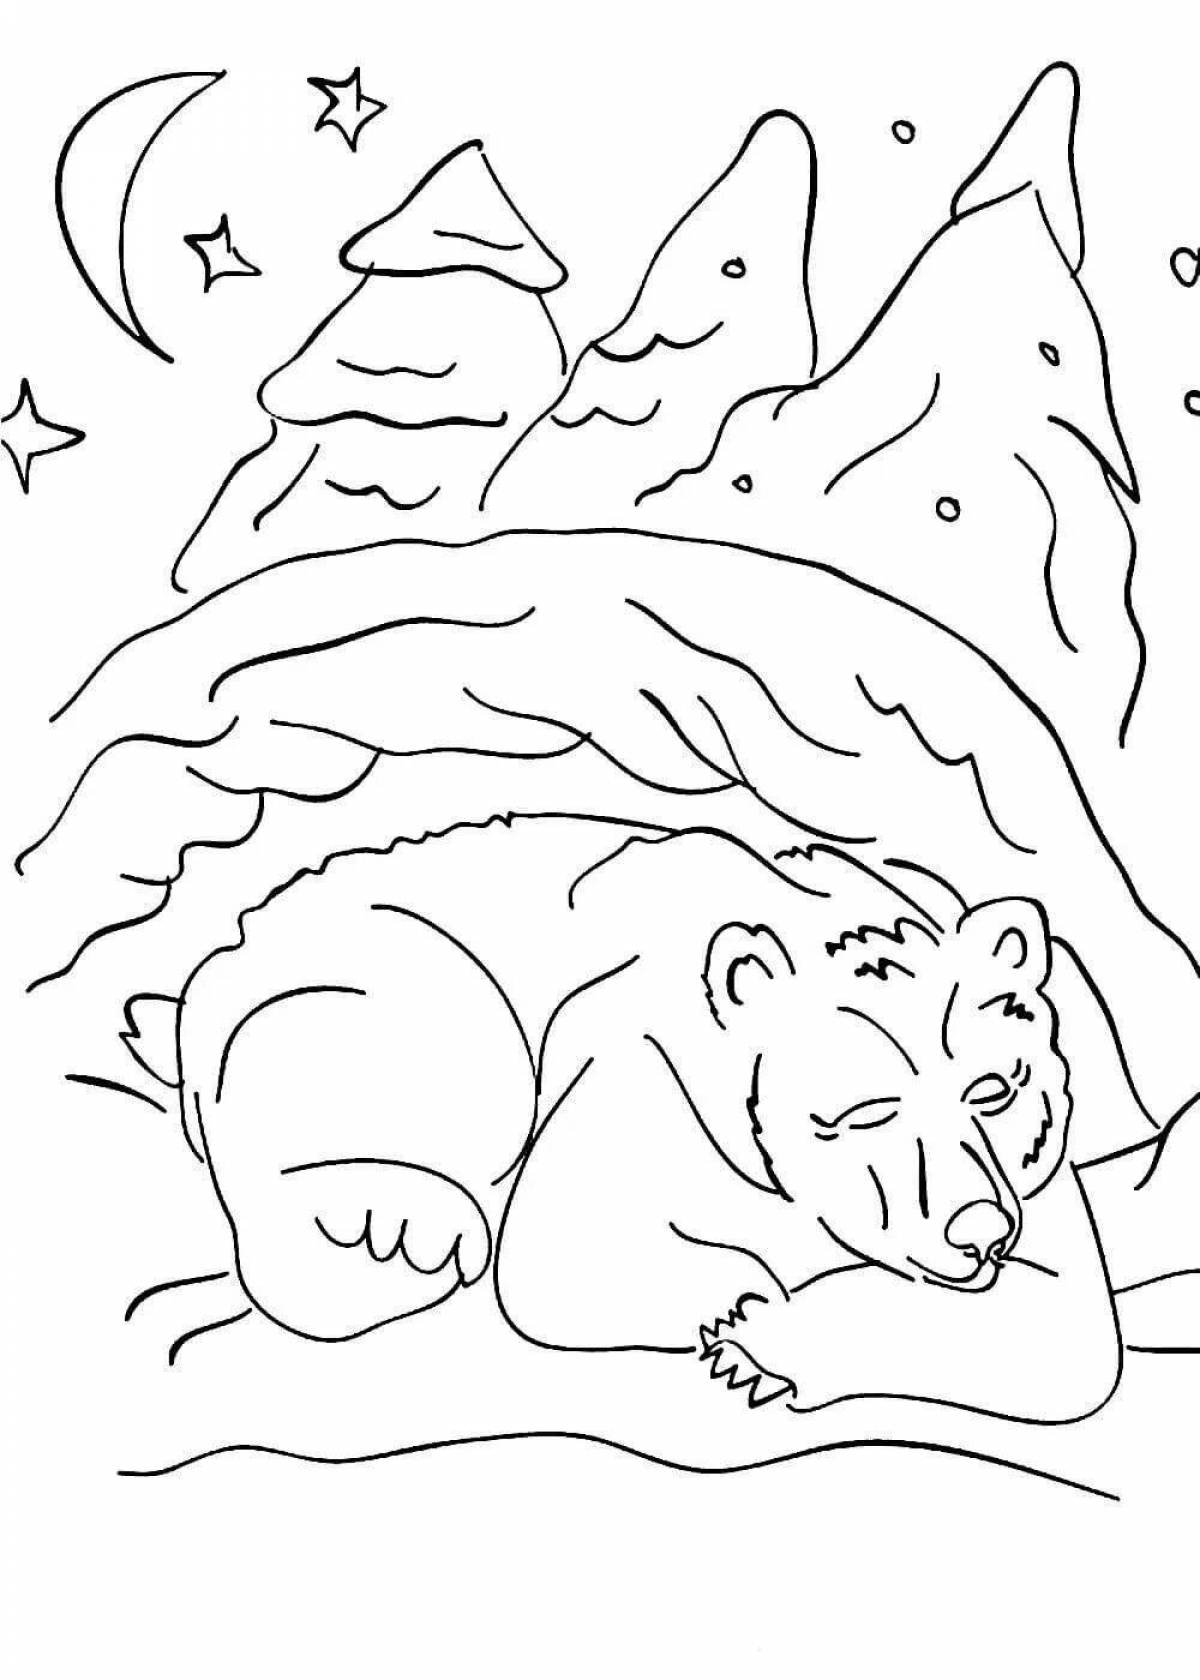 A fascinating coloring book about how animals hibernate